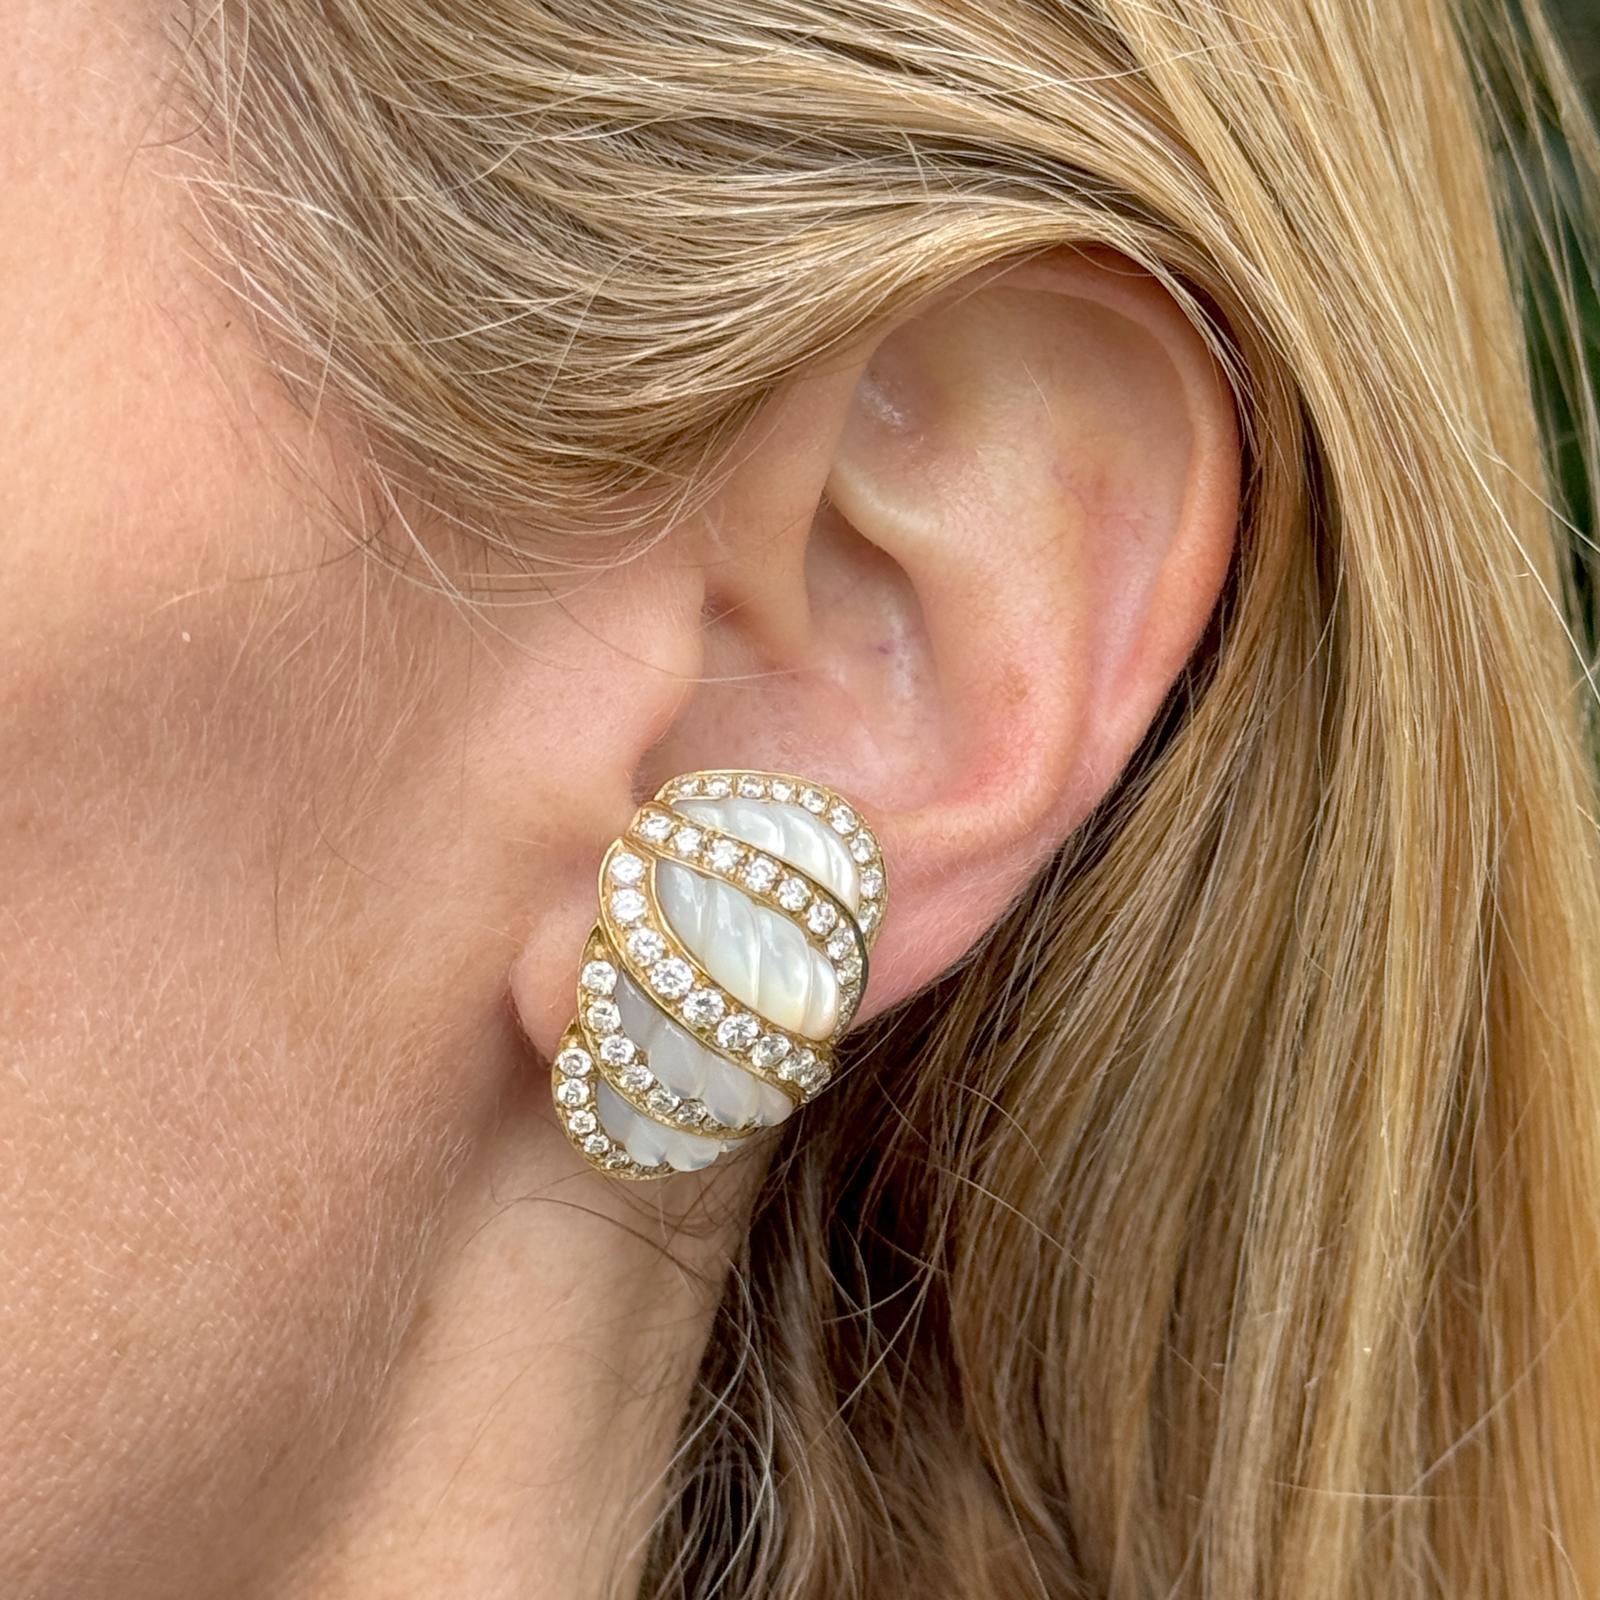 Elegant Italian diamond and carved mother of pearl earrings handcrafted in 18 karat yellow gold. The shrimp style earrings feature 98 round brilliant cut diamonds weighing approximately 5.00 carat total weight and graded F-G color and VS clarity.